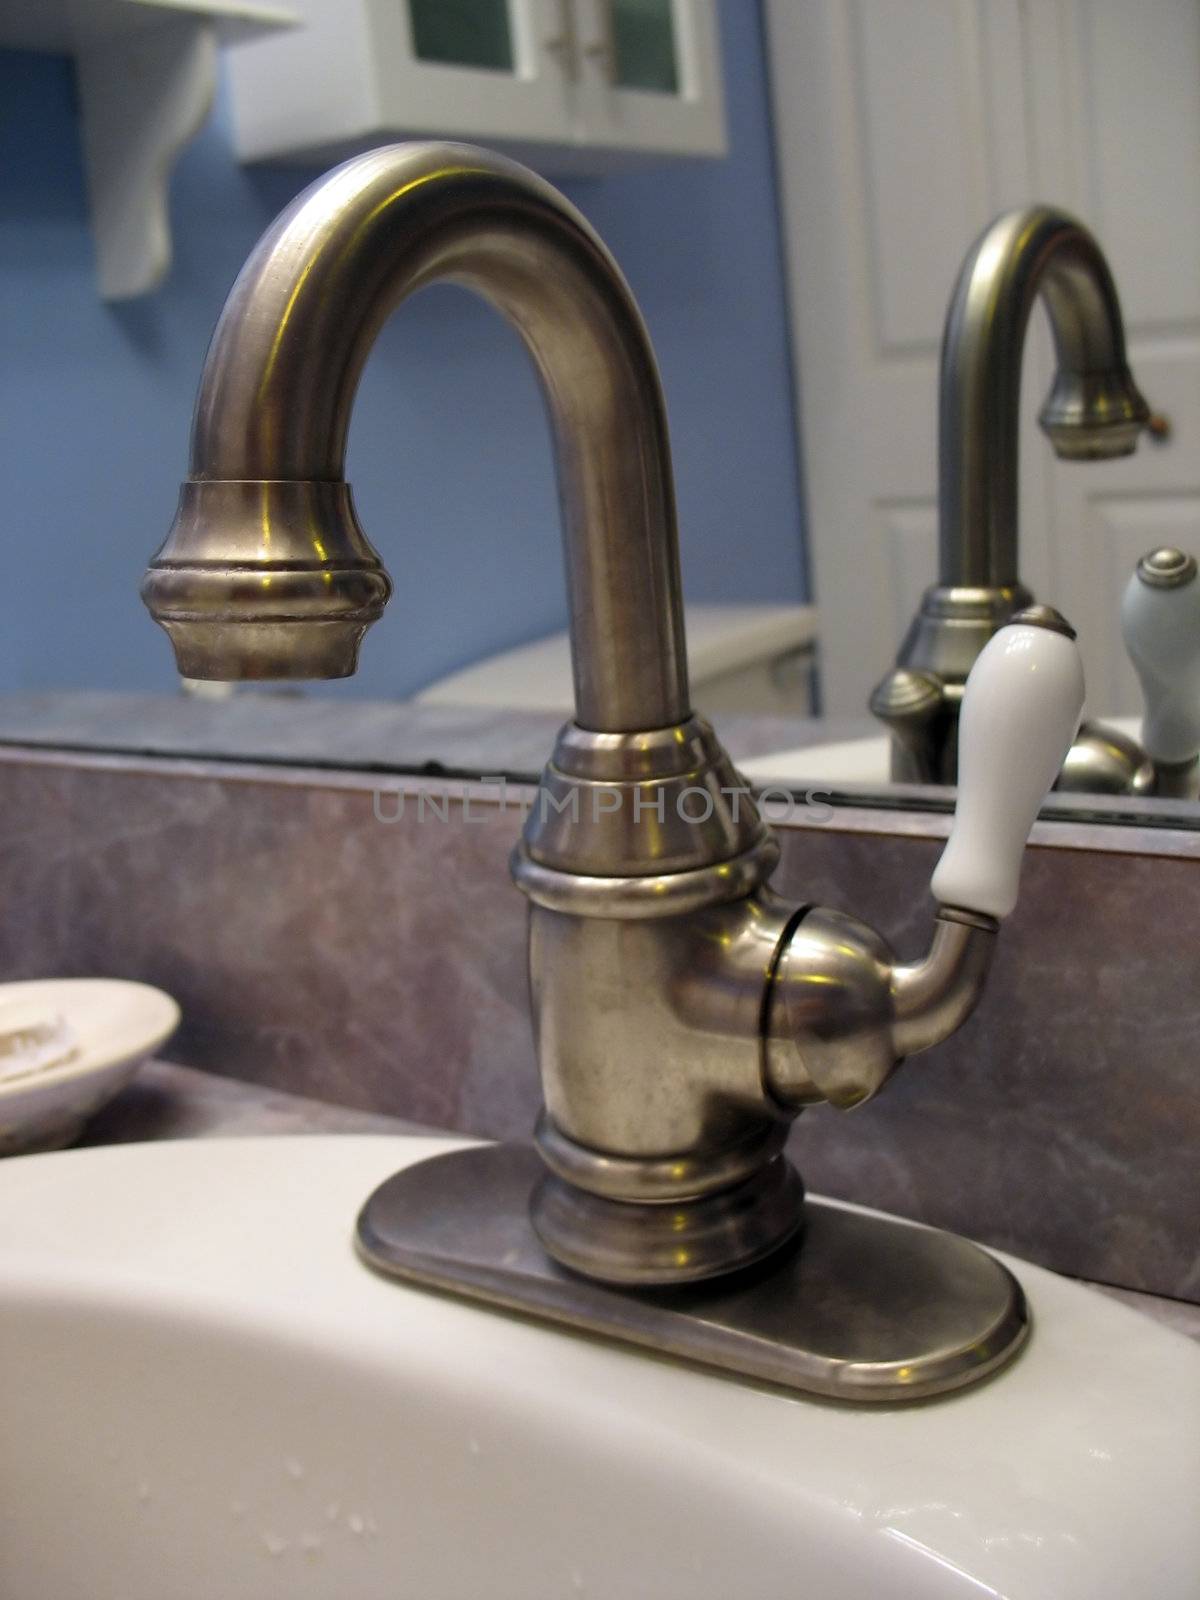 A really nice bathroom faucet - complete with beer-tap style handle to adjust the flow.